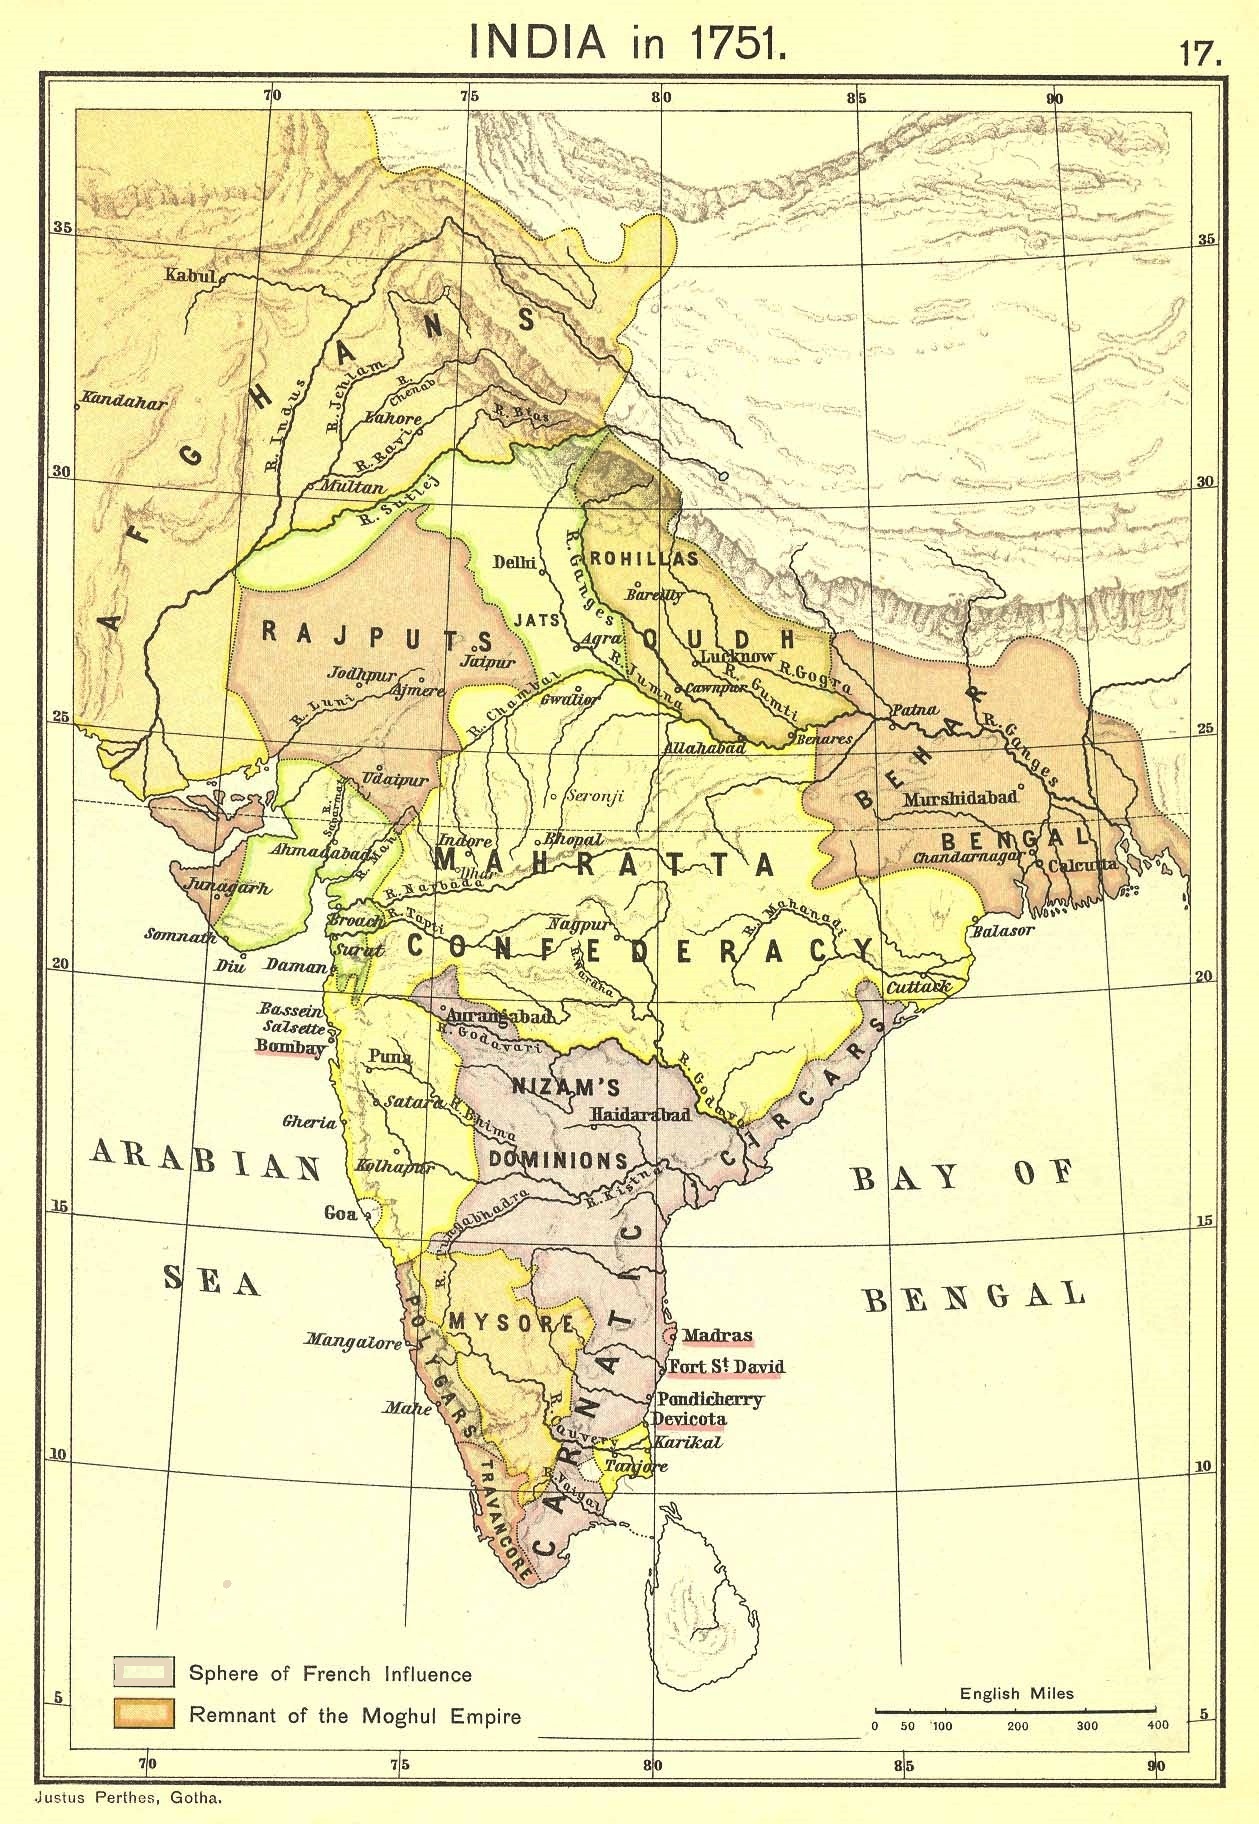 1751_map_of_India_from_%22Historical_Atlas_of_India%22%2C_by_Charles_Joppen.jpg